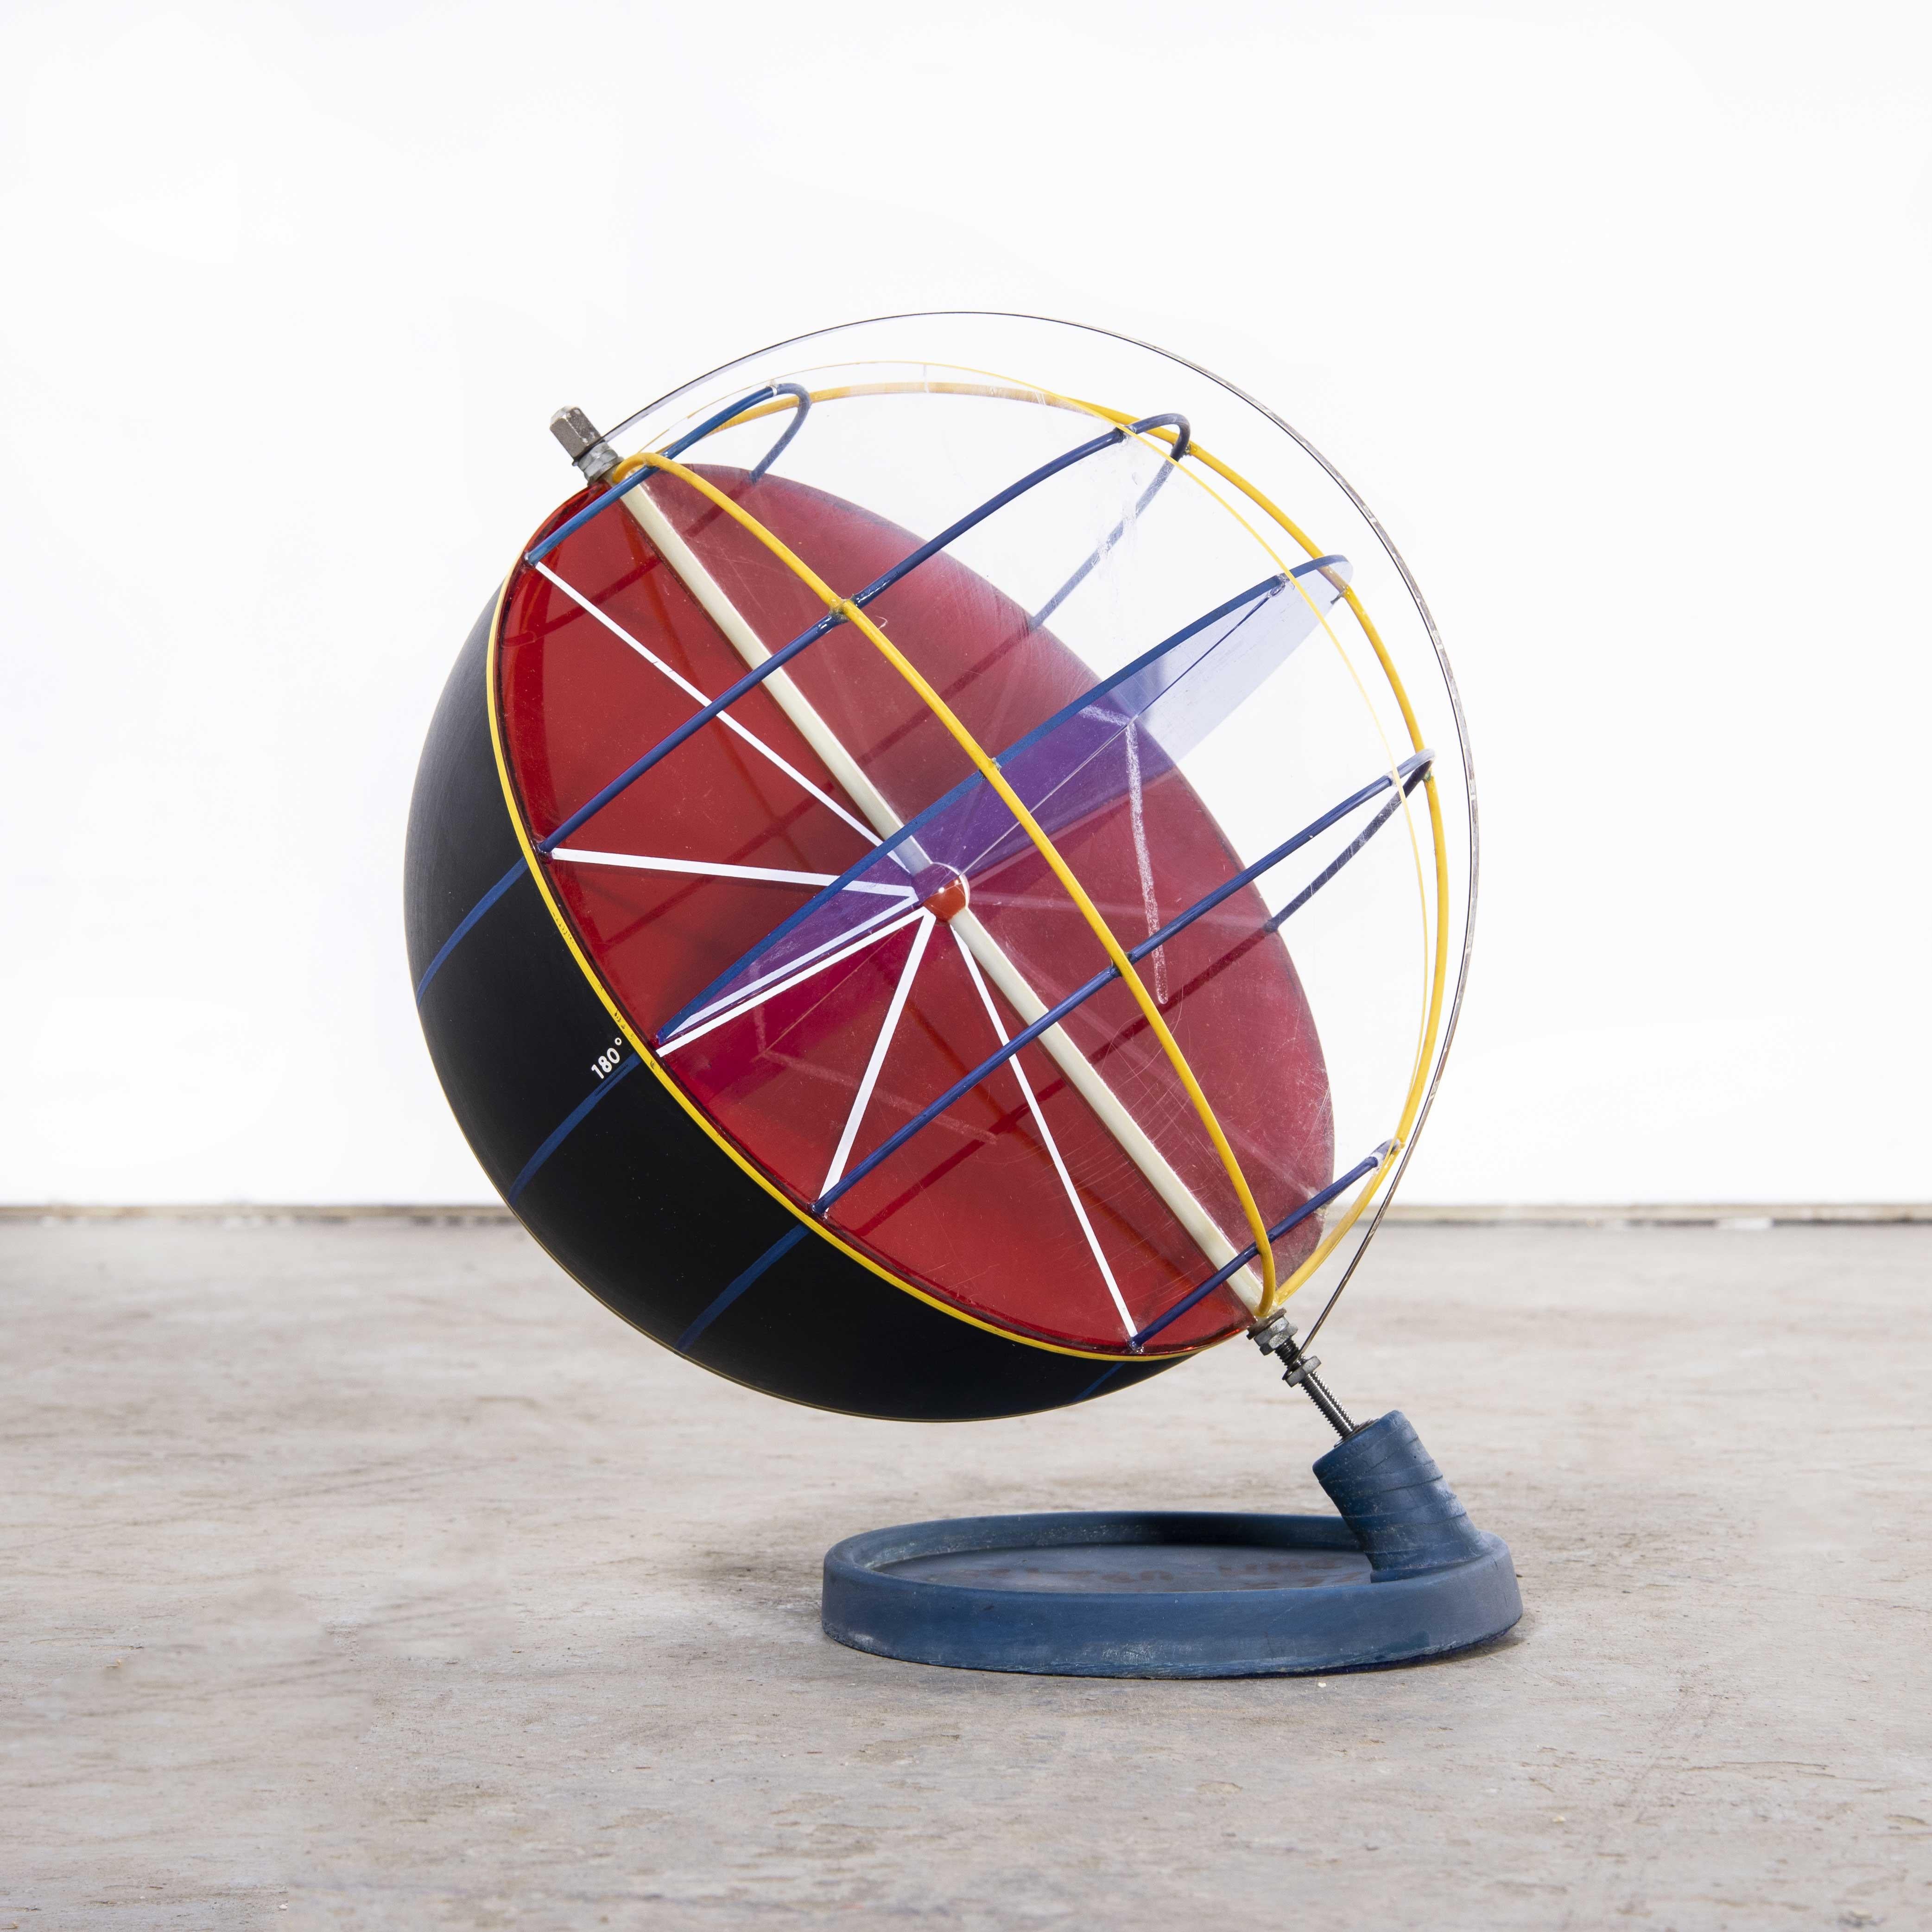 1950’s Earth Geography rotating teaching globe
1950’s Earth Geography rotating teaching globe. Sourced from a Czech collector this rare globe was used as a teaching aid to explain the position of the earths longitude and latitude markings. The